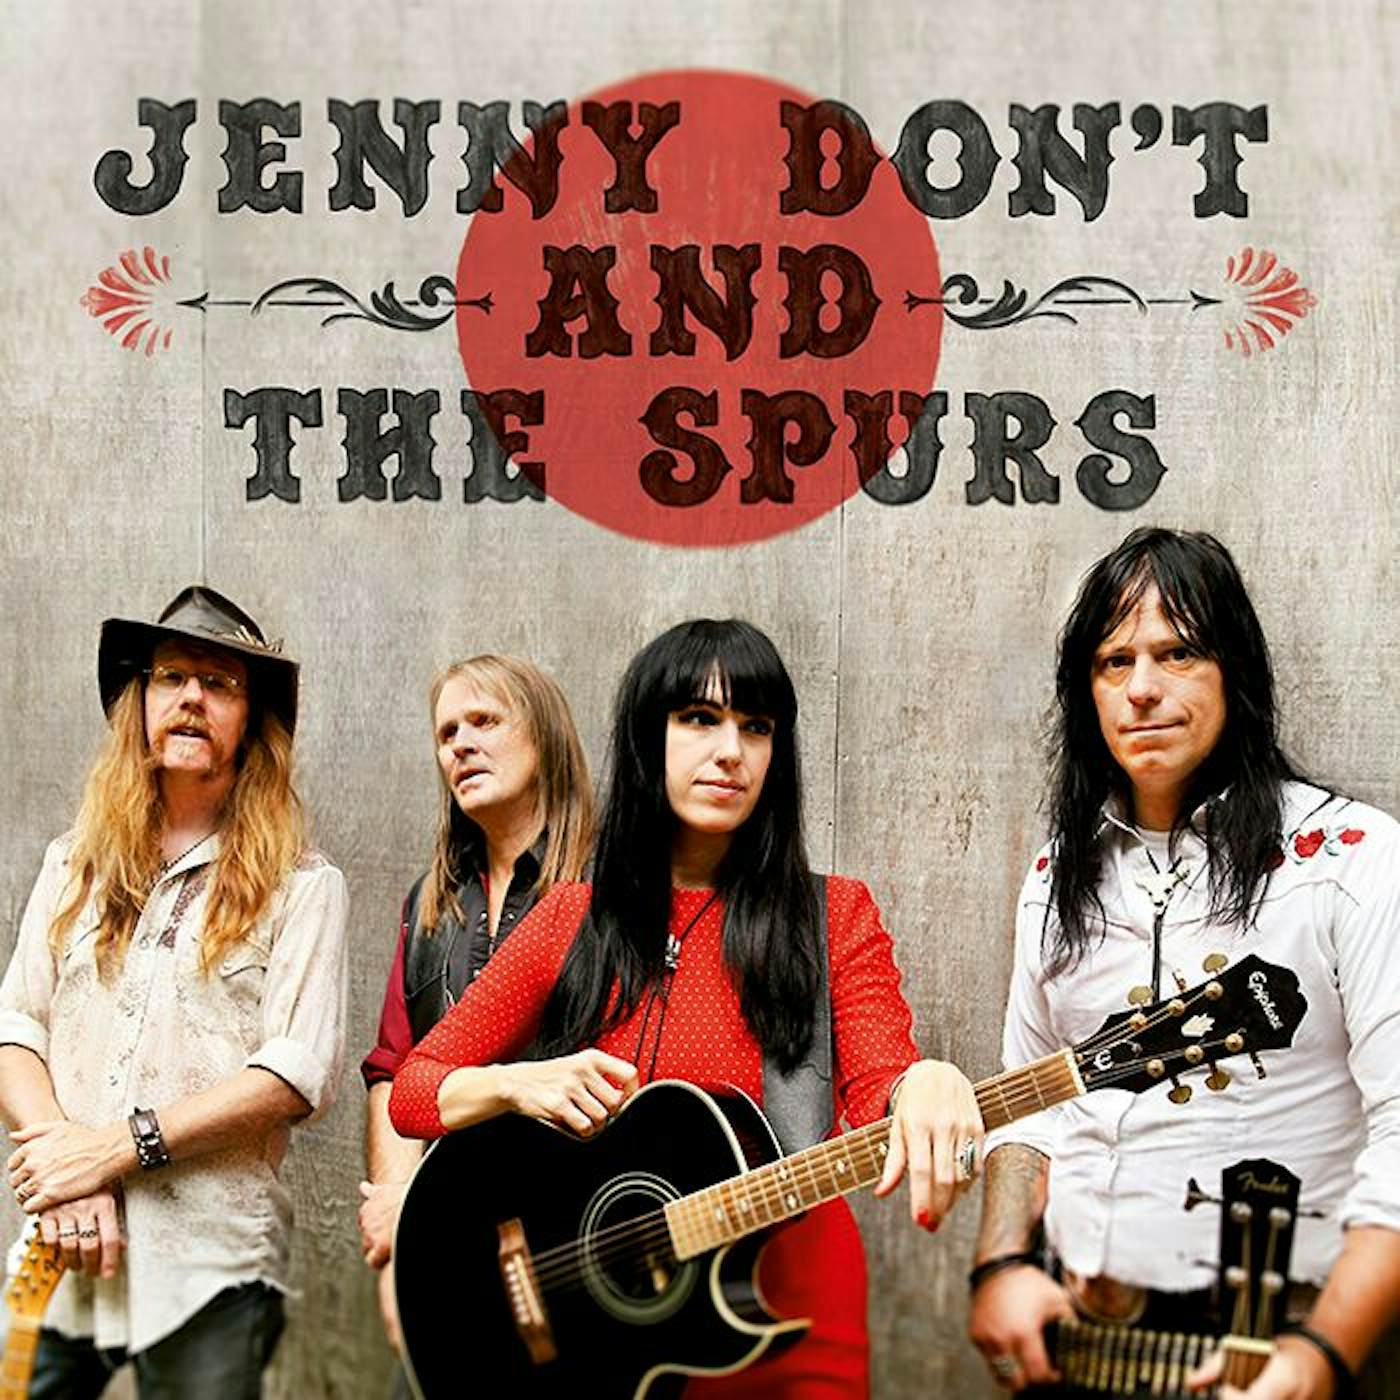 Jenny Don't and the Spurs Vinyl Record